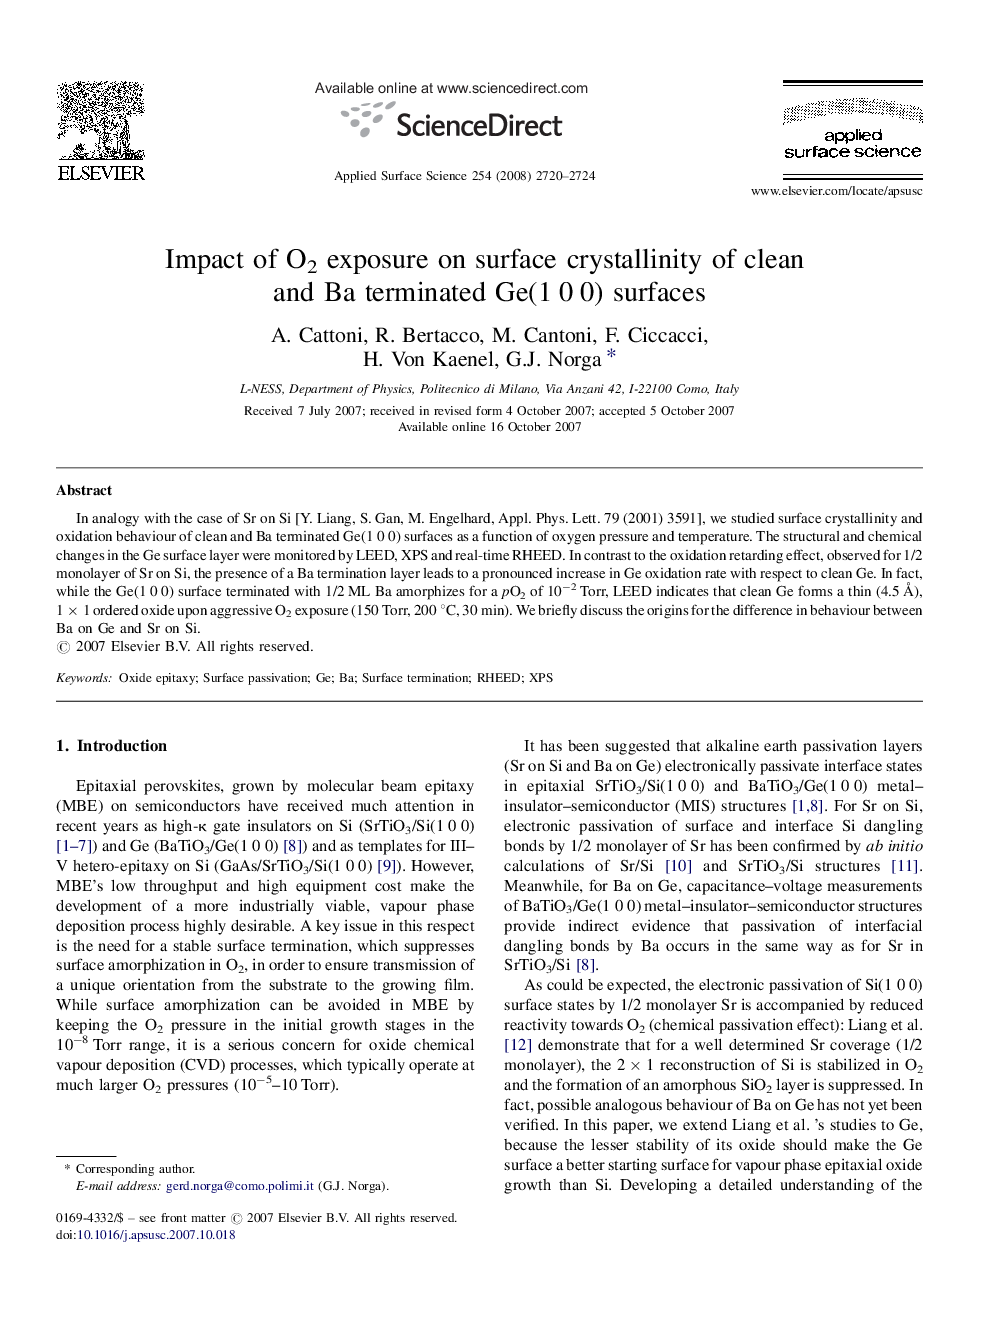 Impact of O2 exposure on surface crystallinity of clean and Ba terminated Ge(1 0 0) surfaces